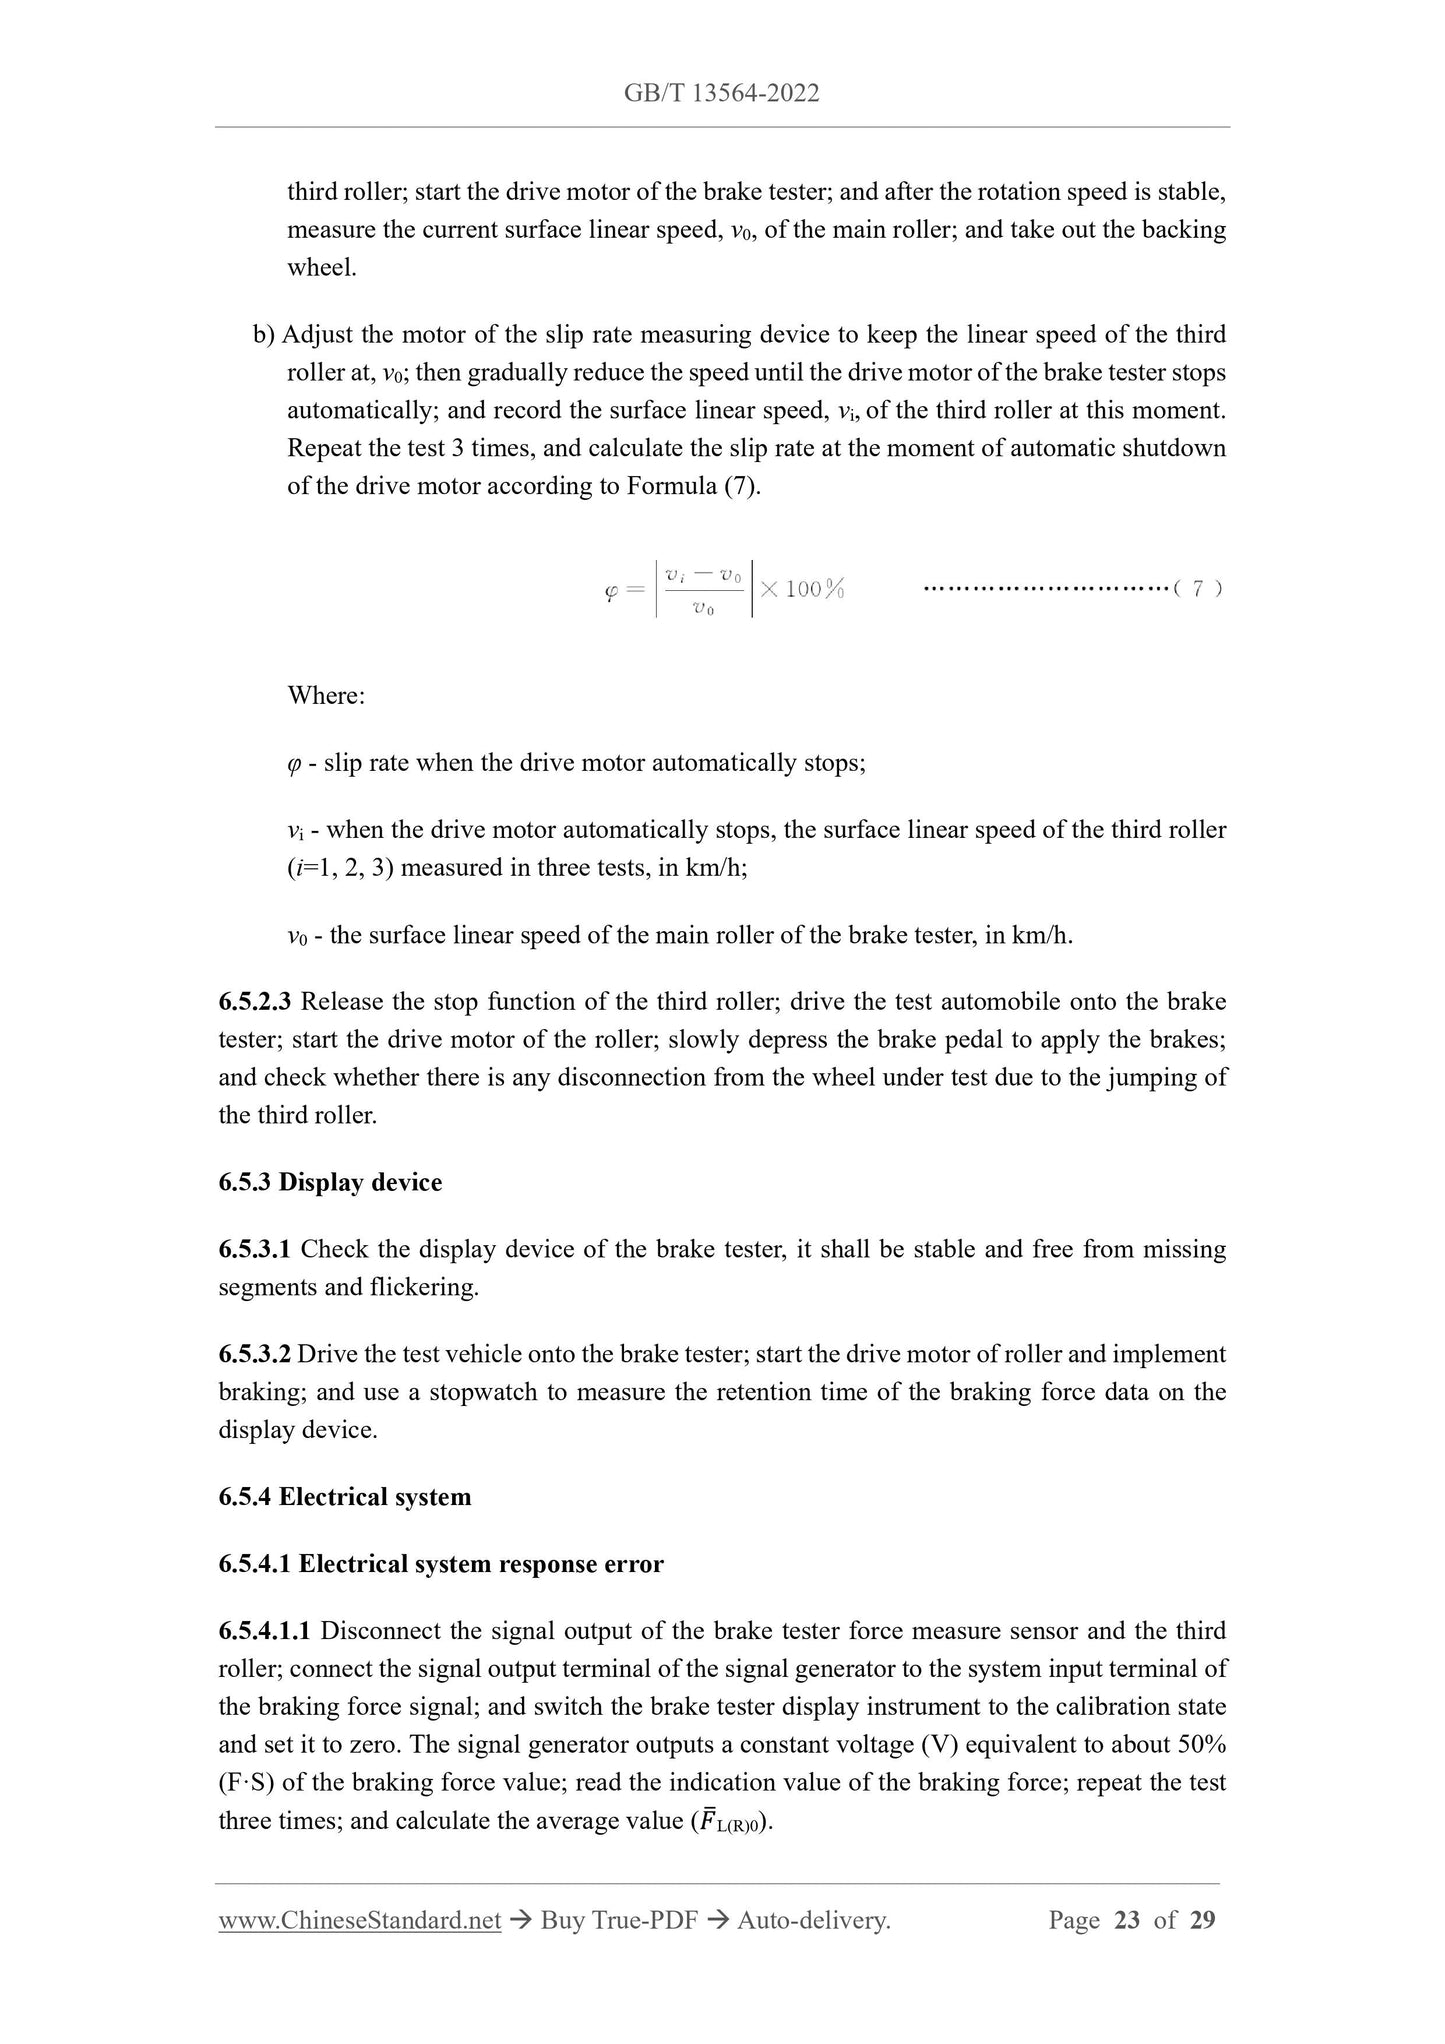 GB/T 13564-2022 Page 8